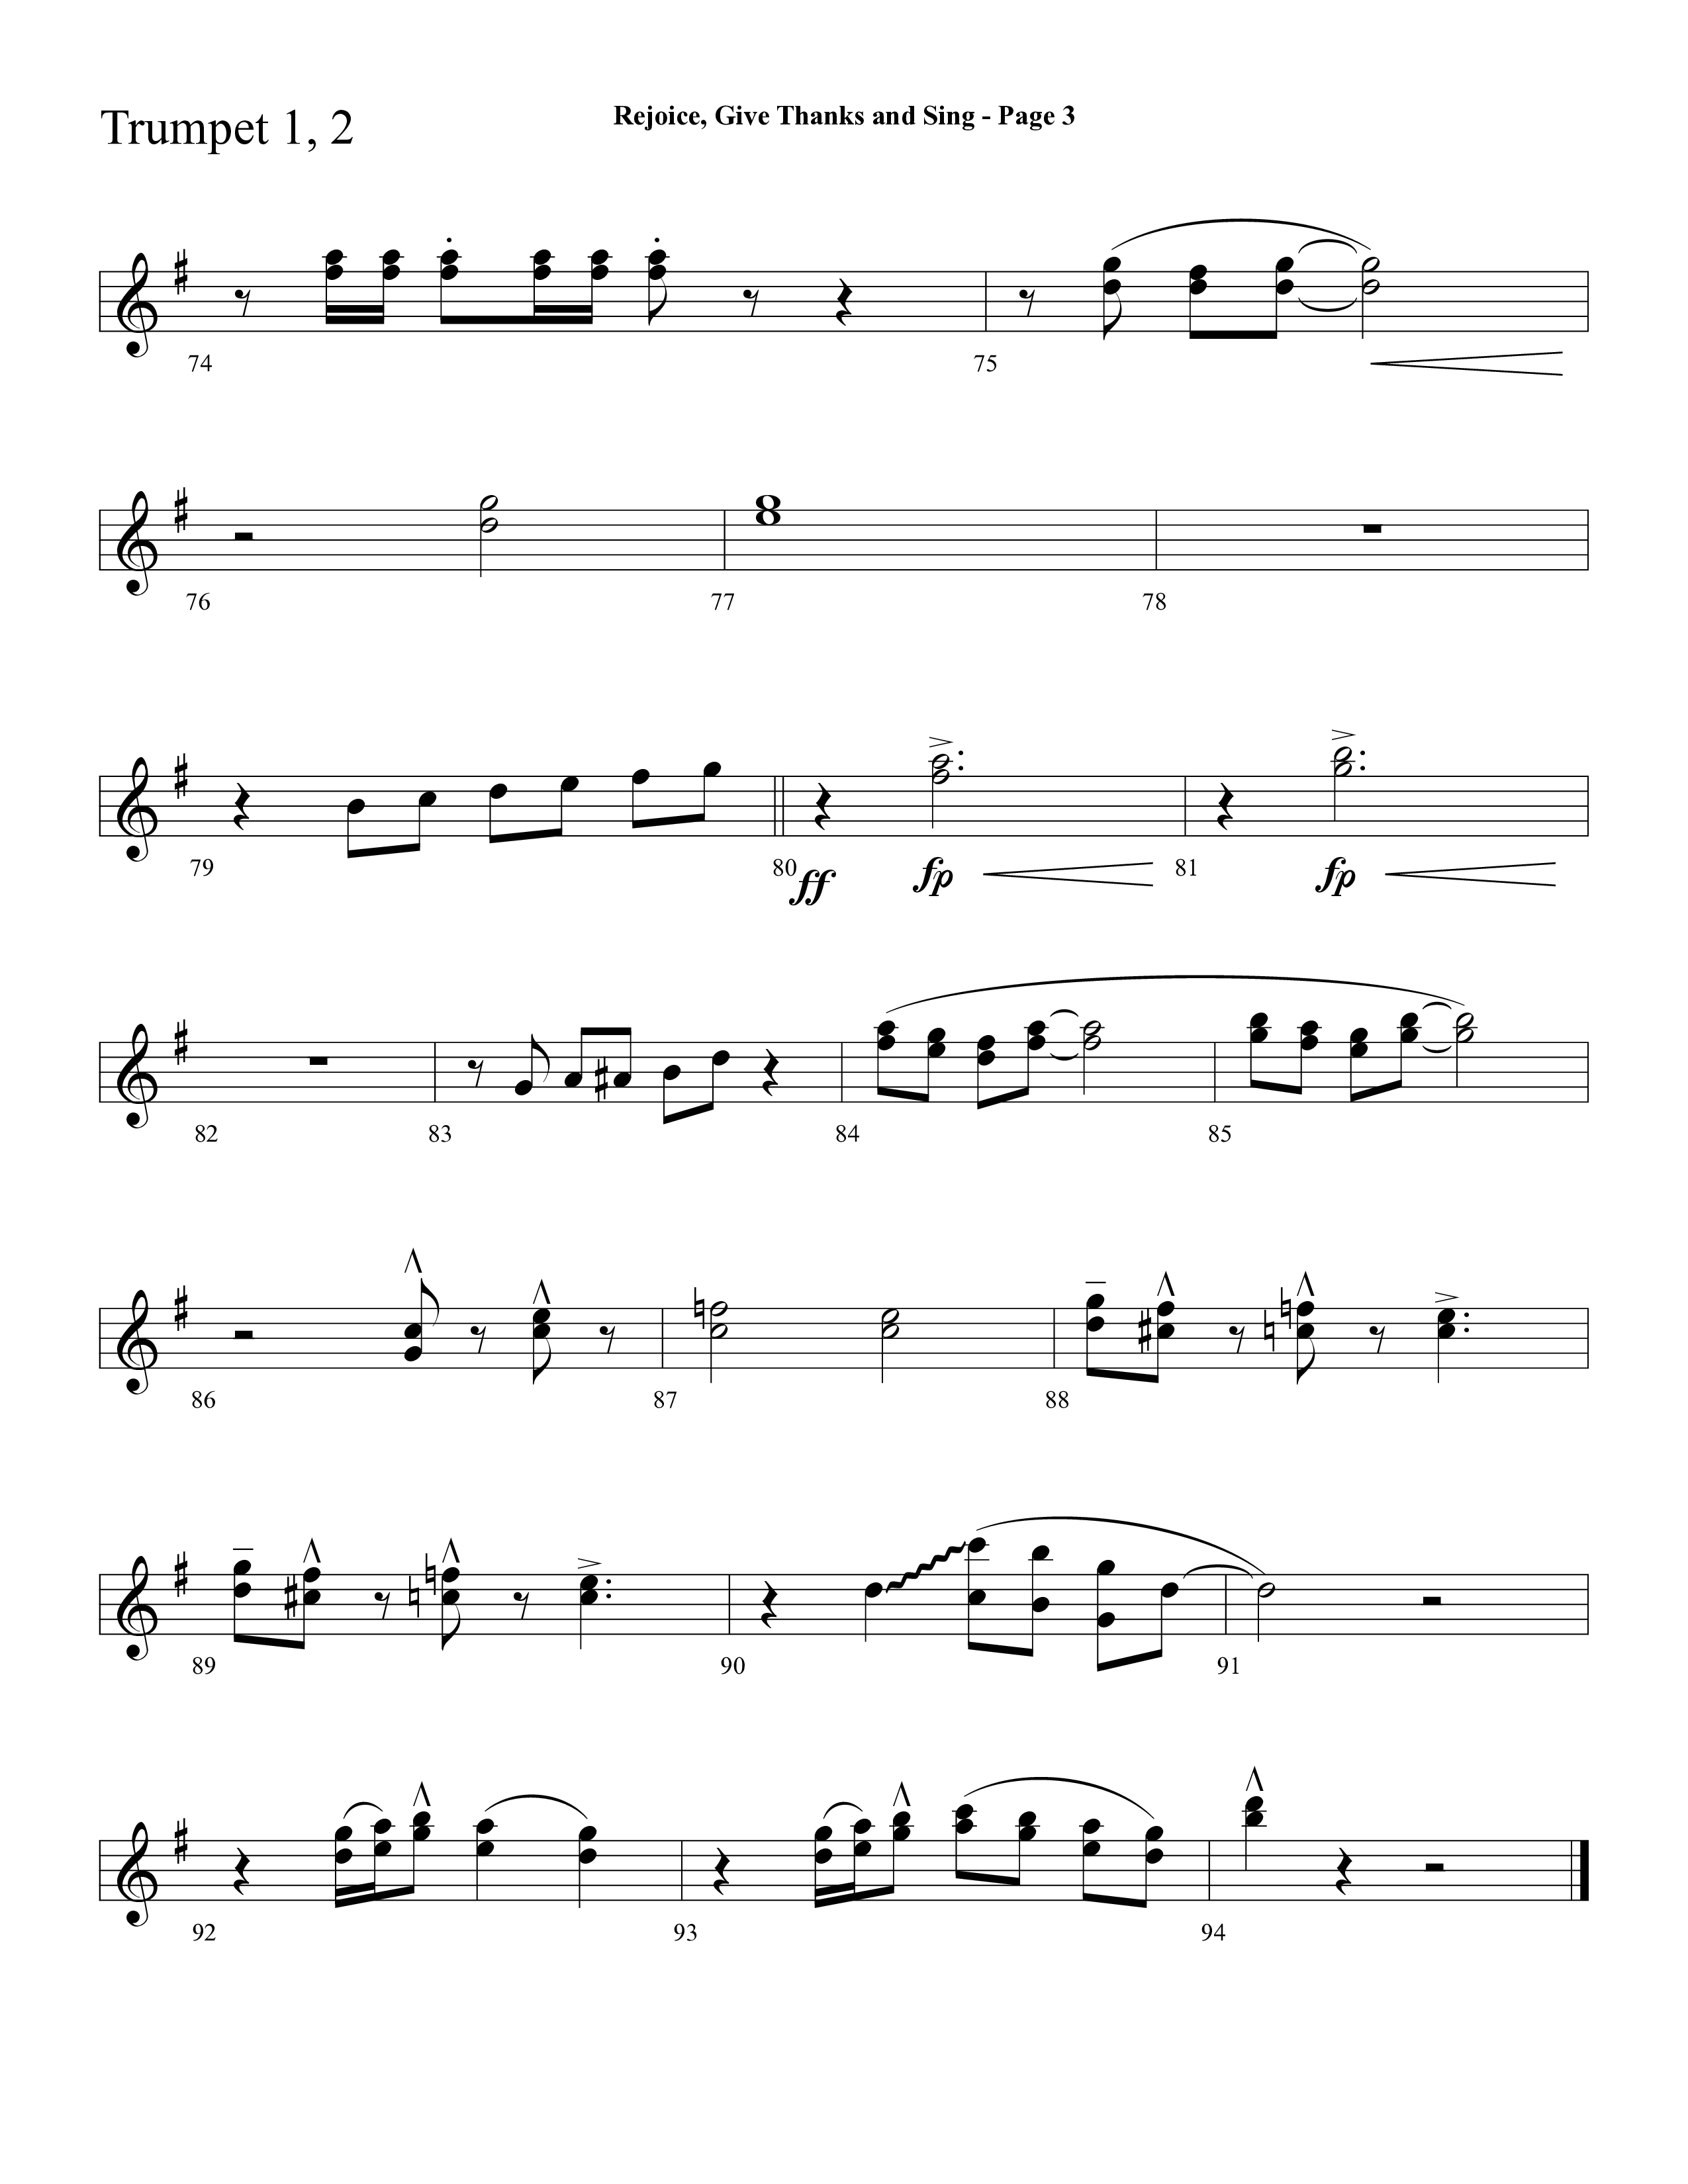 Rejoice, Give Thanks And Sing (with Rejoice, The Lord Is King, Come, Thou Almighty King) (Choral Anthem SATB) Trumpet 1,2 (Lifeway Choral / Arr. Dave Williamson)